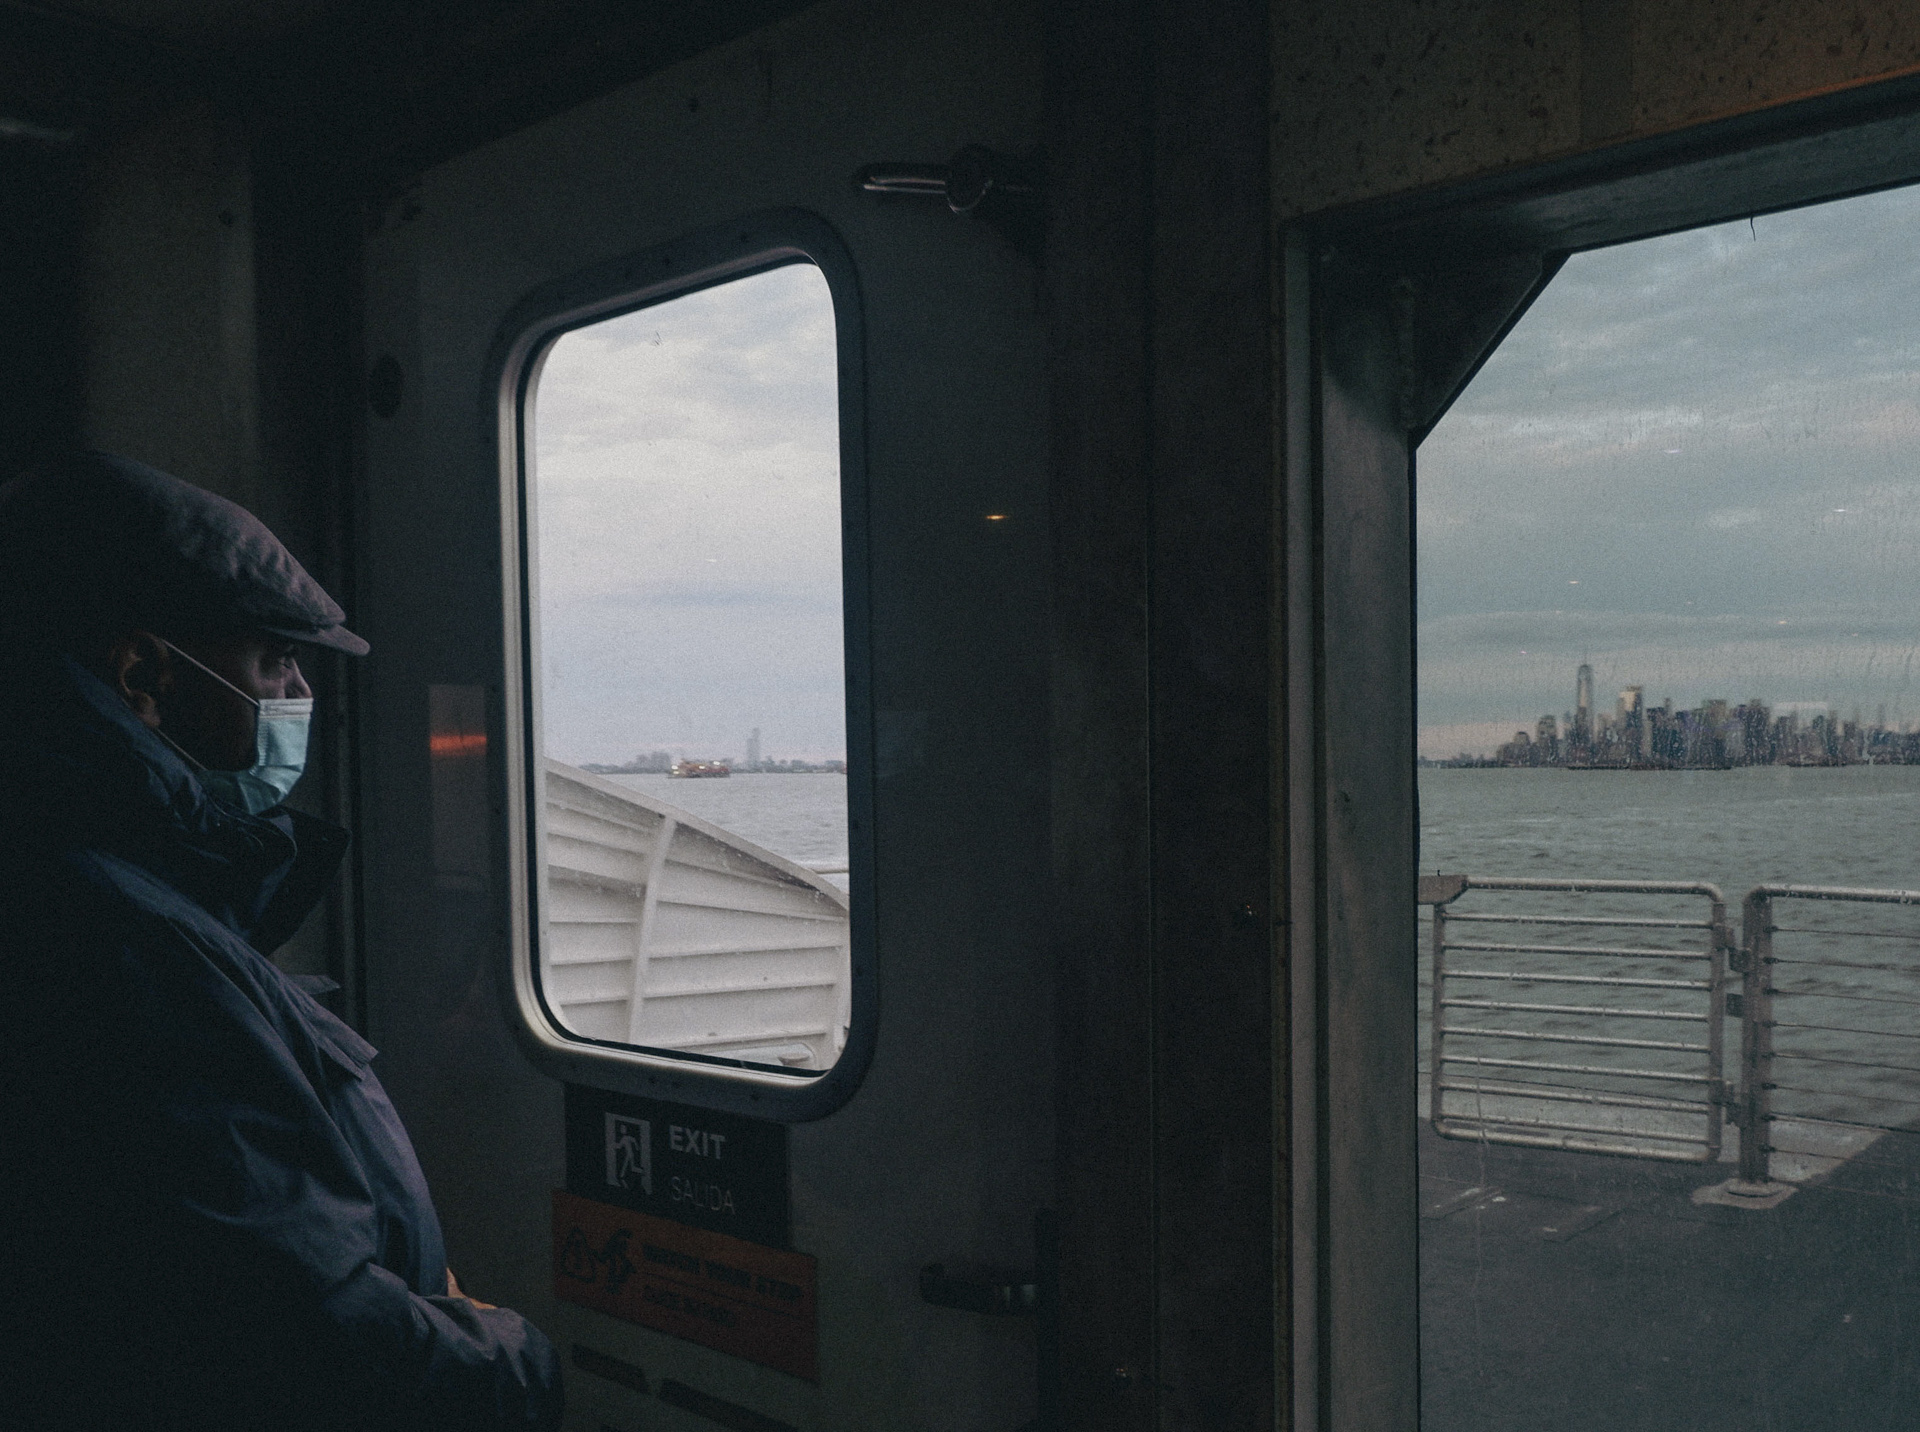 photo of a ferry with windows looking onto the NYC skyline